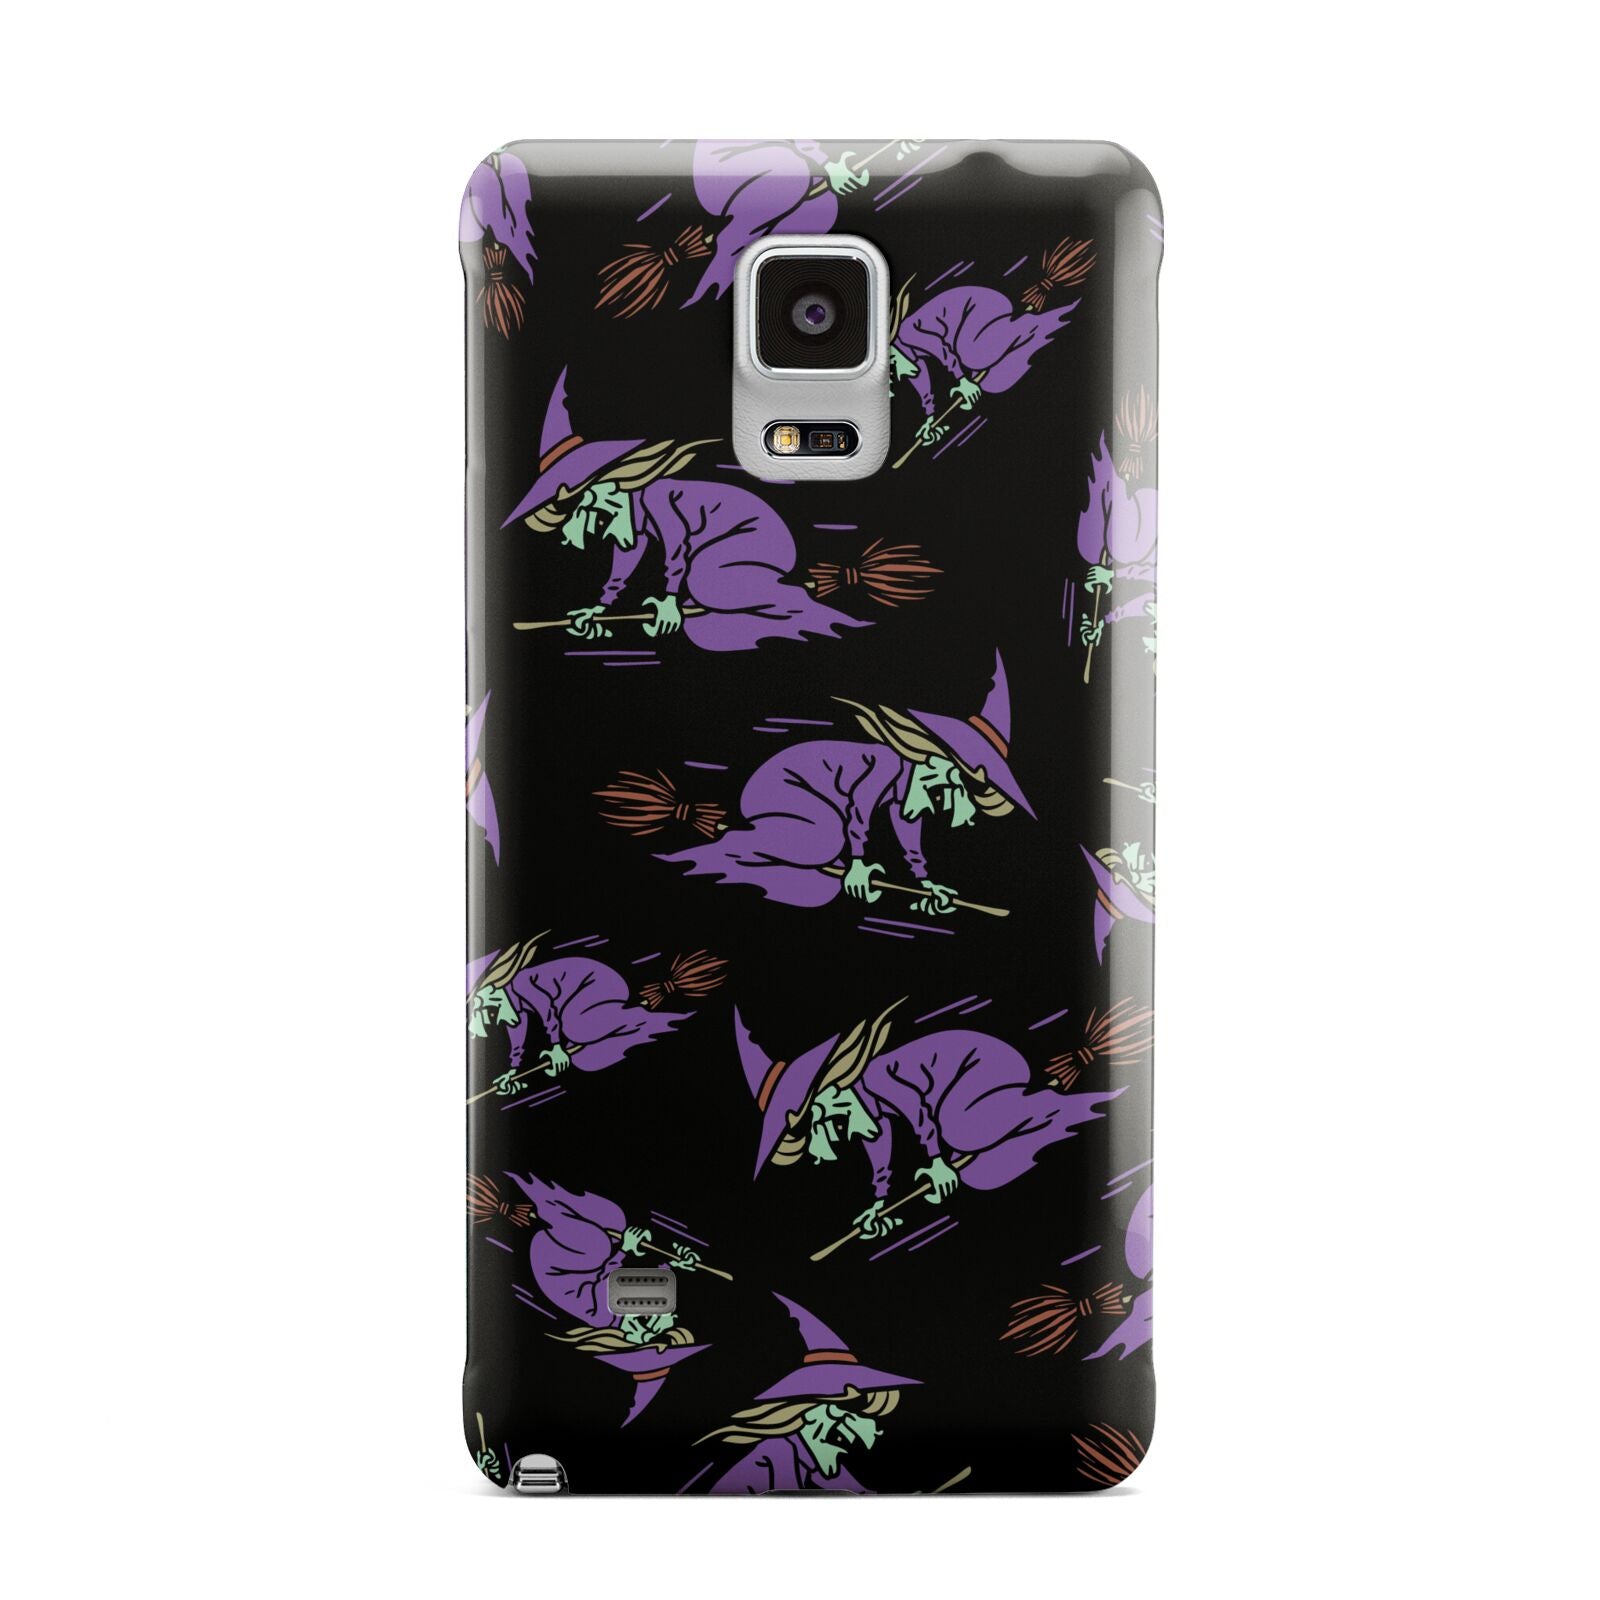 Flying Witches Samsung Galaxy Note 4 Case